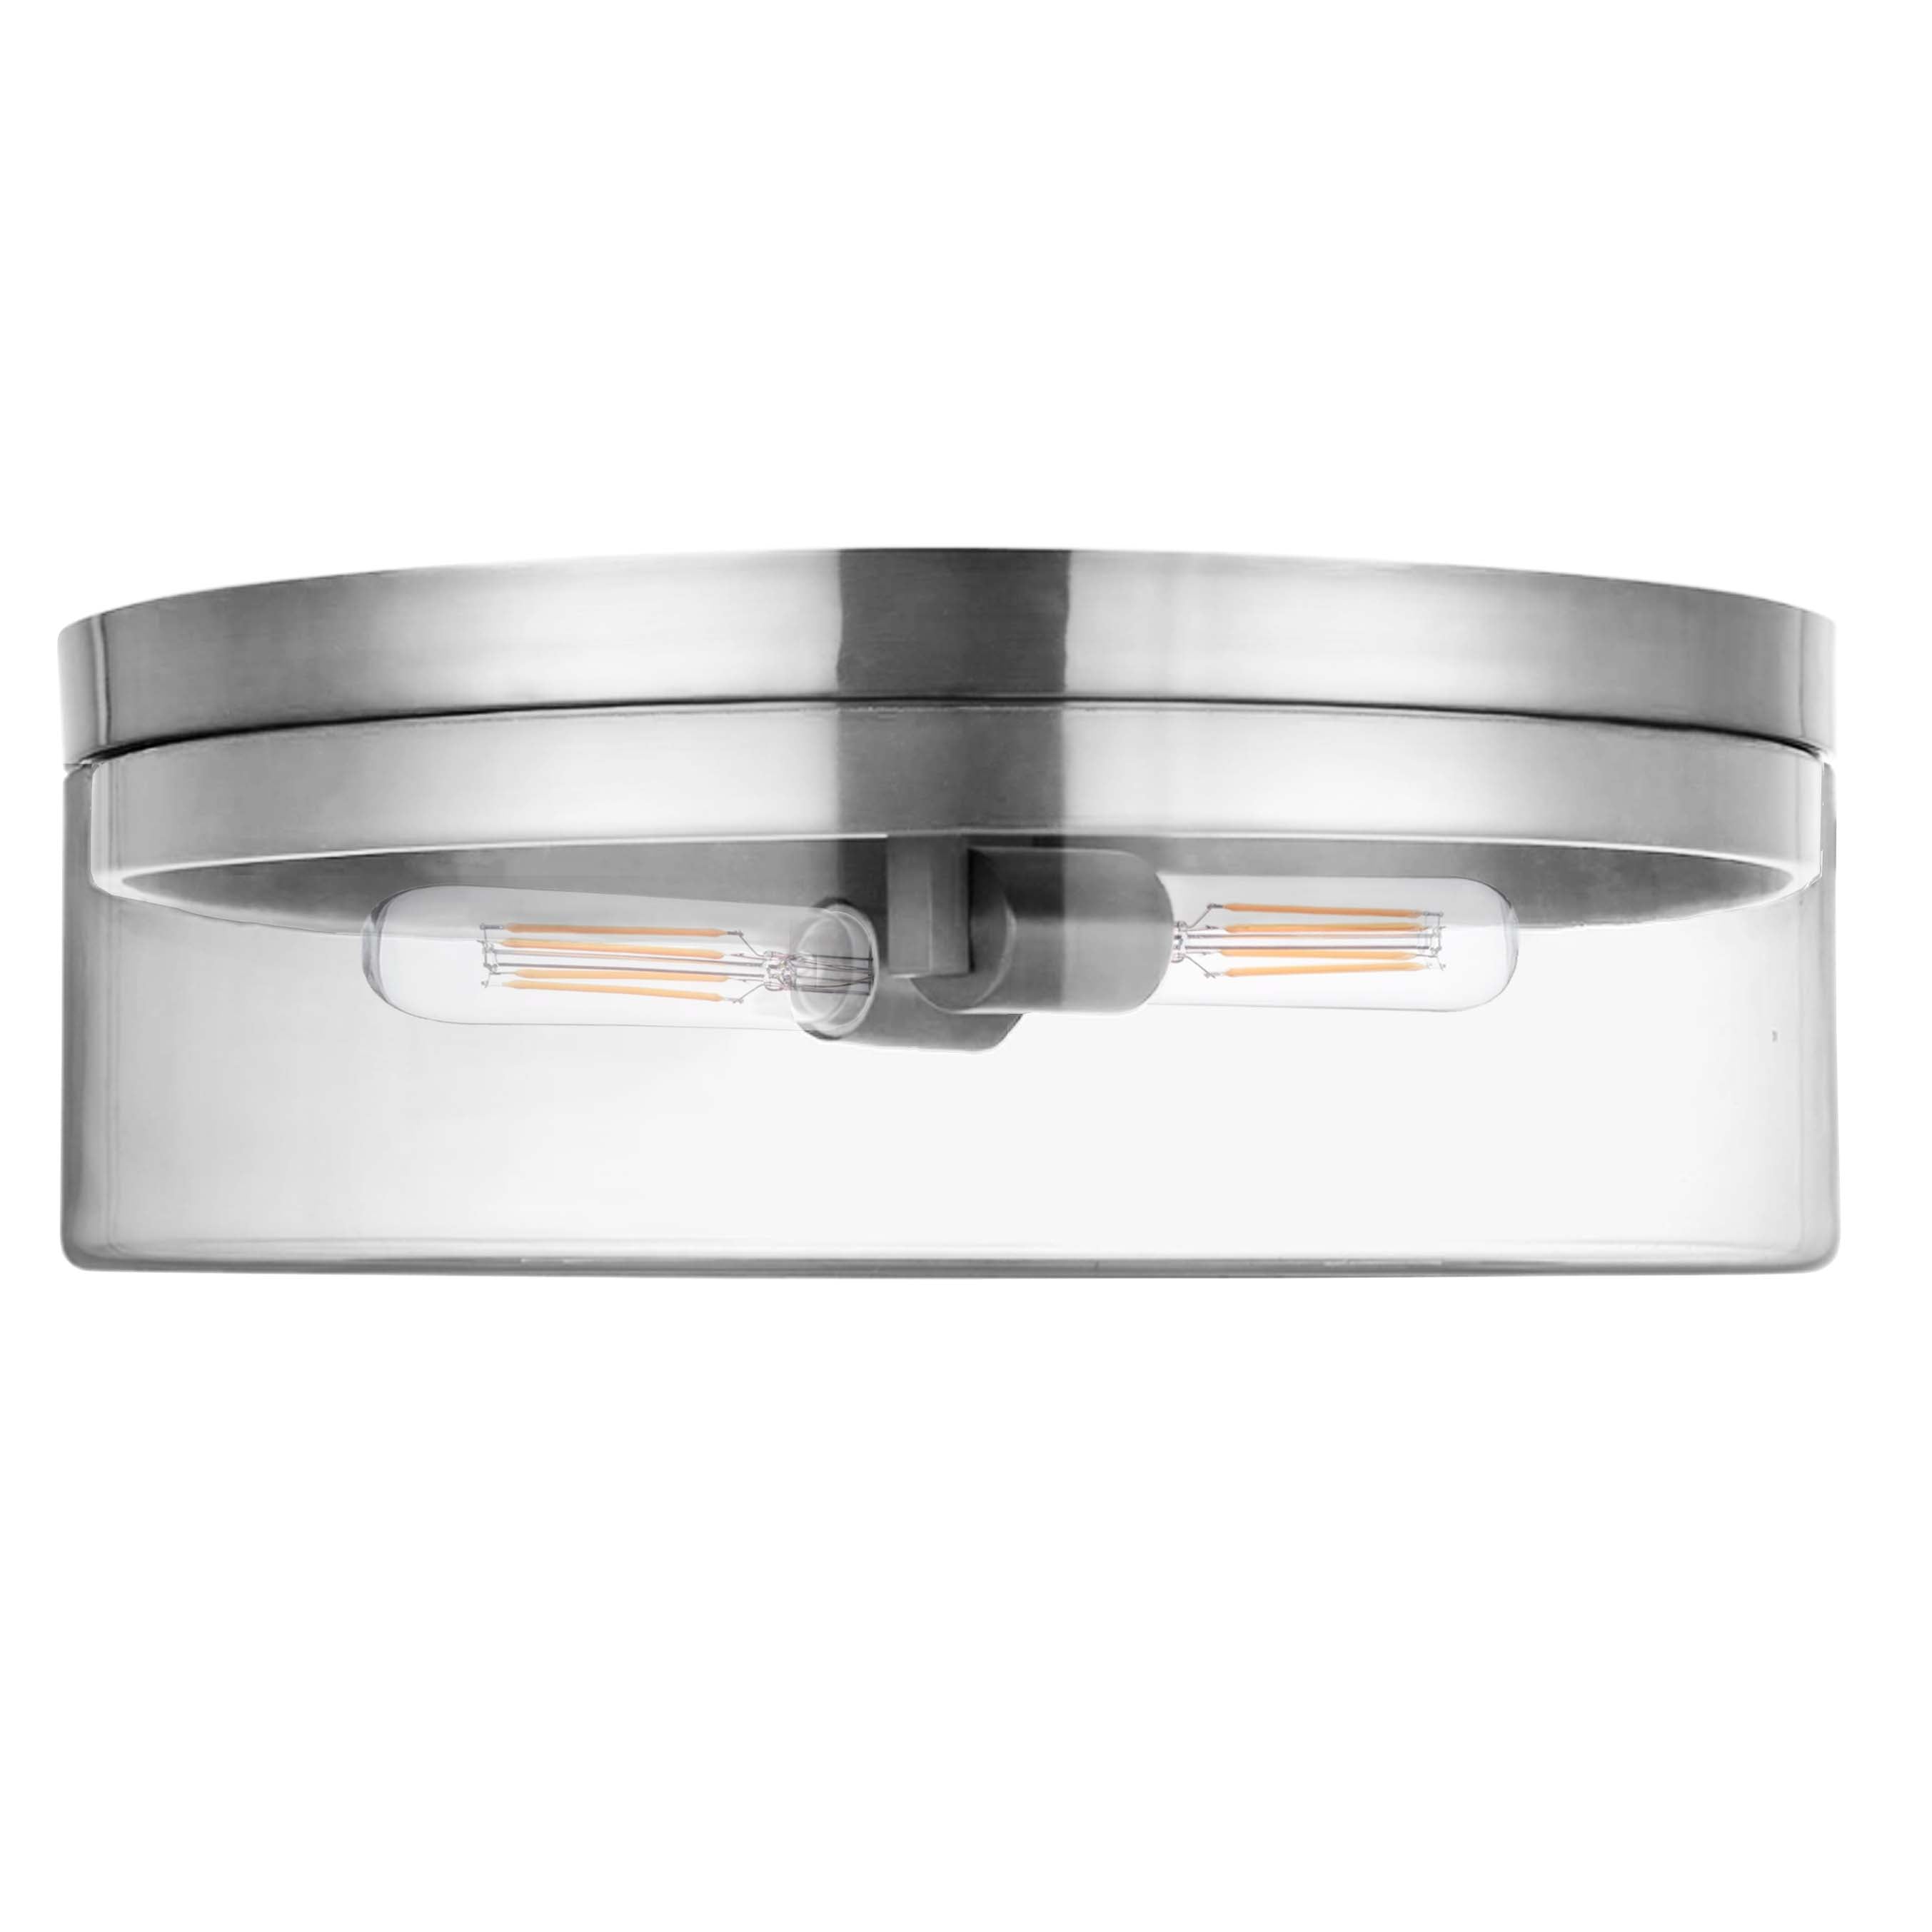 Dainolite FNA-142FH-PC-CLR 2 Light Incandescent Flush Mount Polished Chrome with Clear Glass